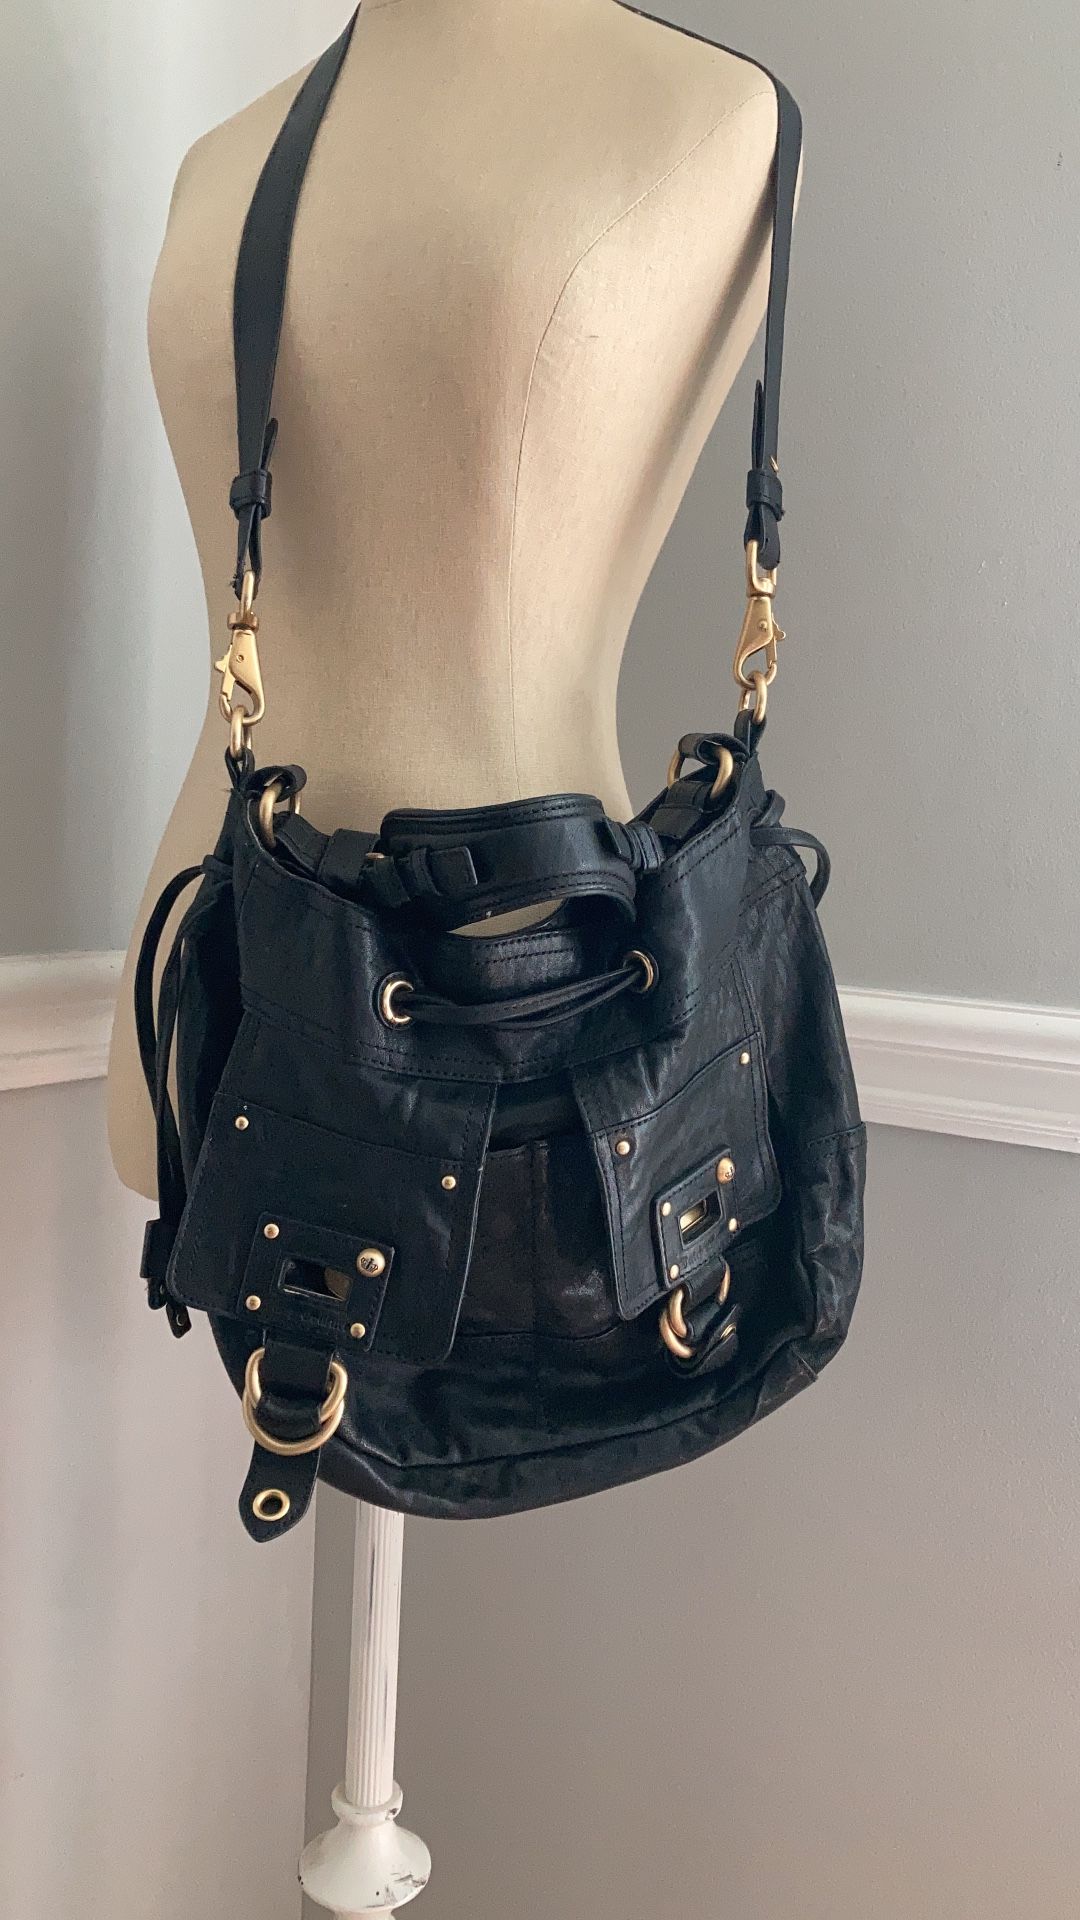 Juicy Couture Black Leather Messenger Bag